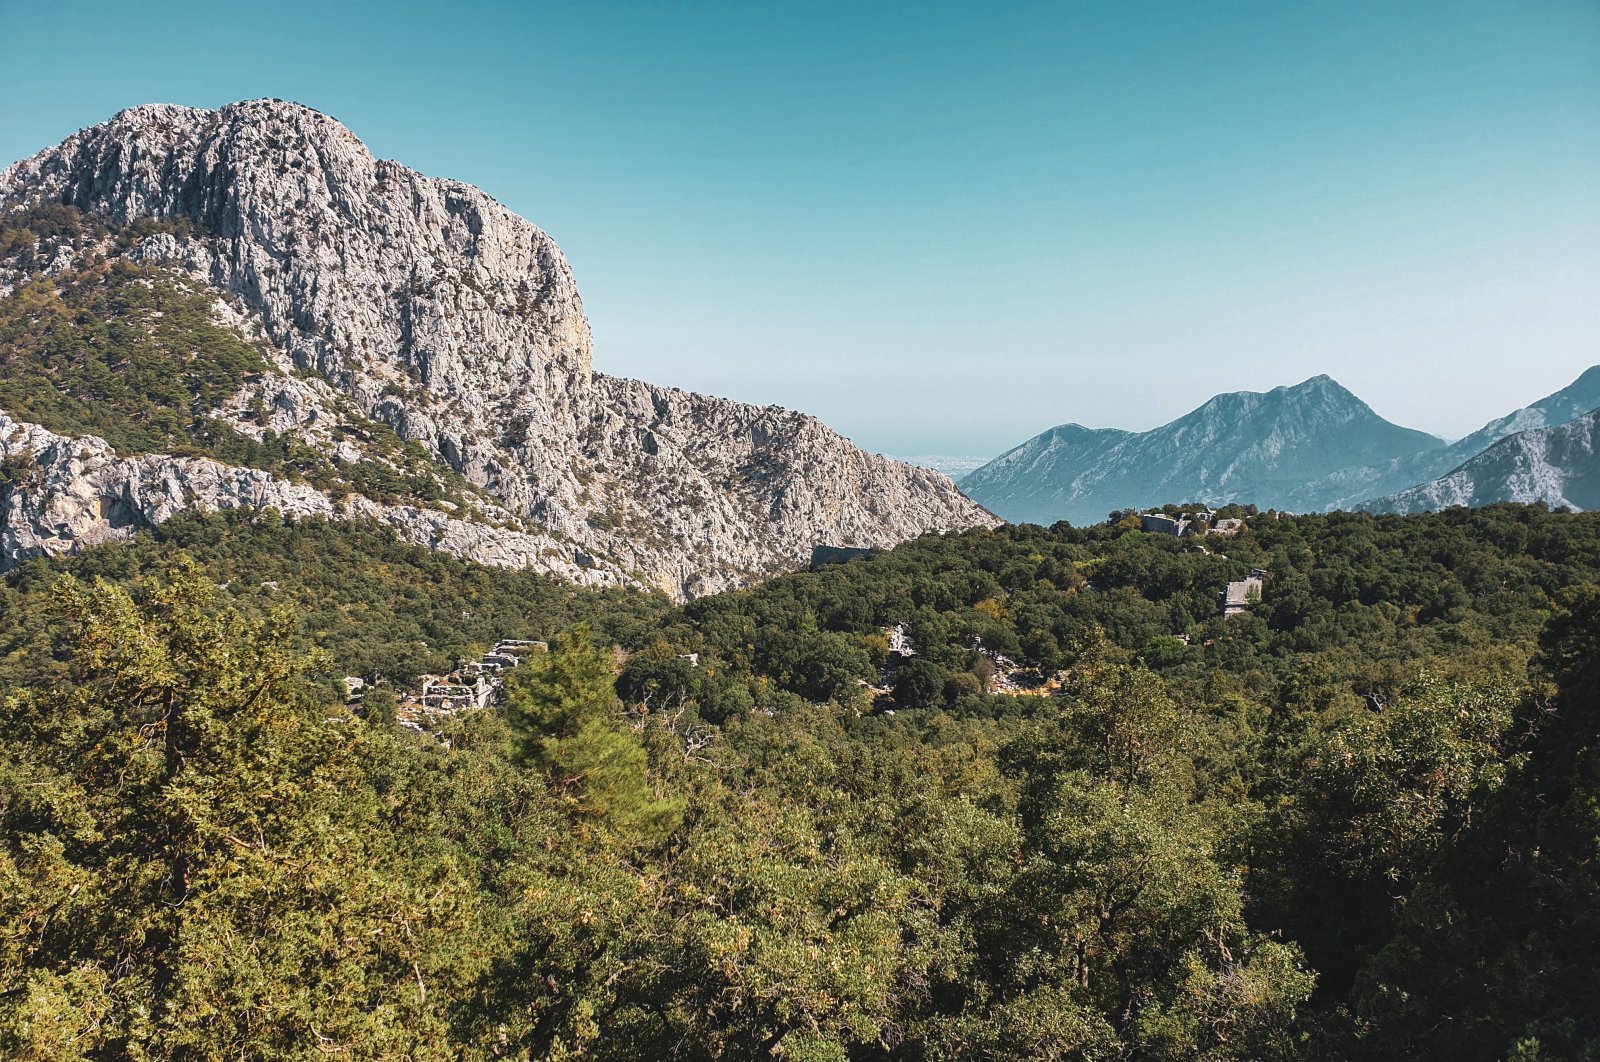 Though mostly in ruins, the ancient city of Termessos is still spectacular and now surrounded by a sea of green. (Photo by Argun Konuk)